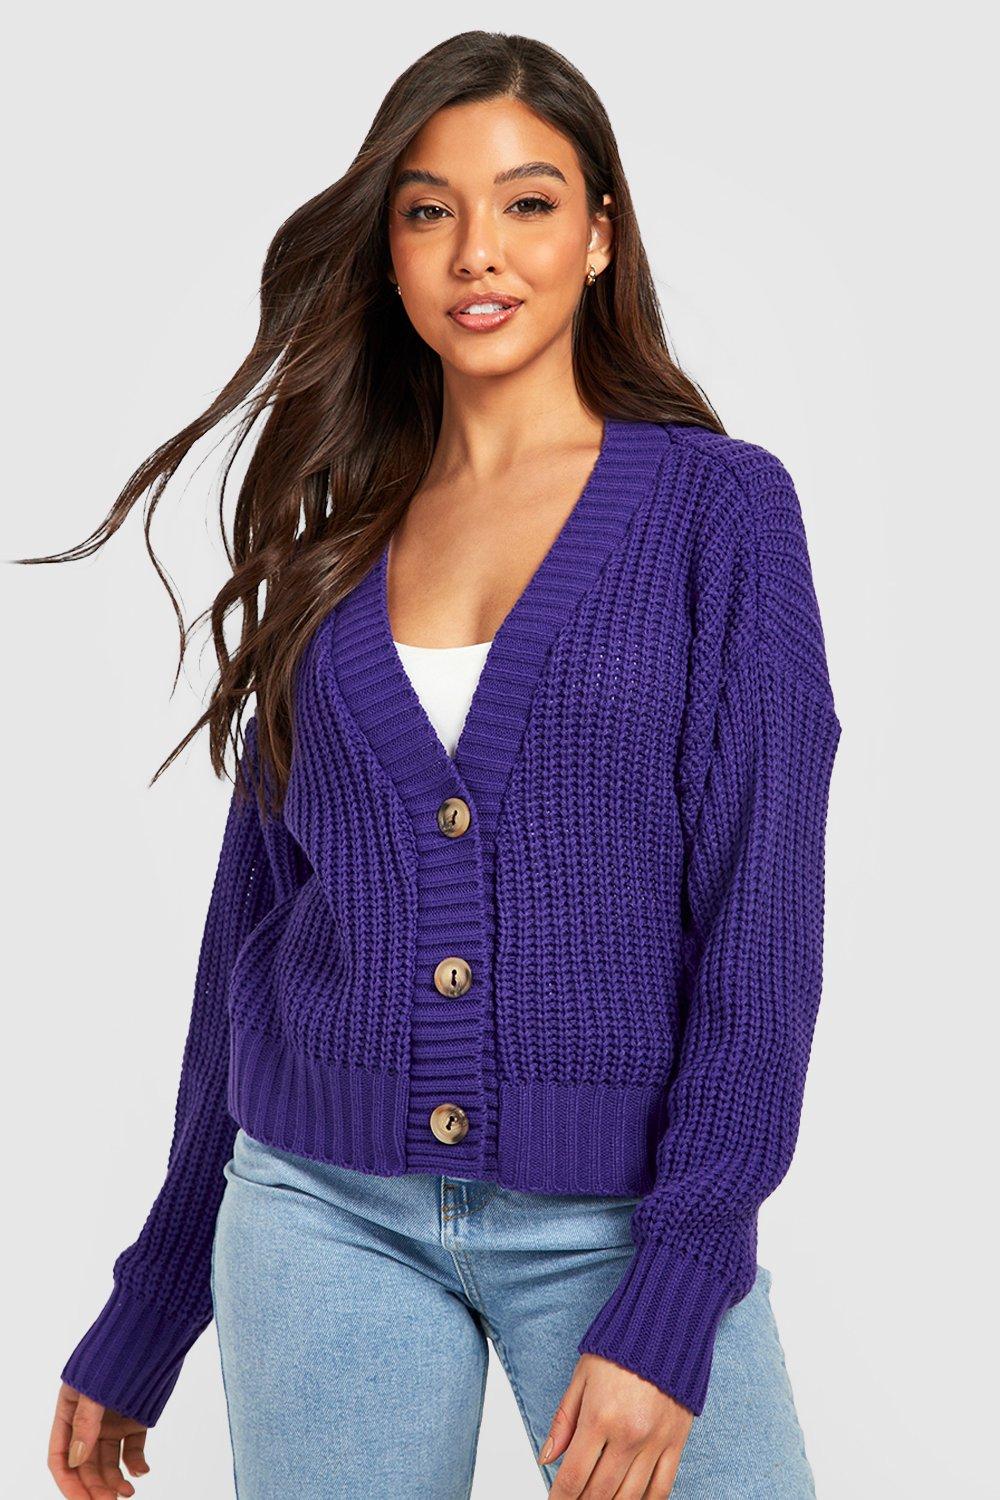 80s Sweatshirts, Sweaters, Vests | Women Womens Chunky Knit Cropped Cardigan - Purple - M $28.00 AT vintagedancer.com